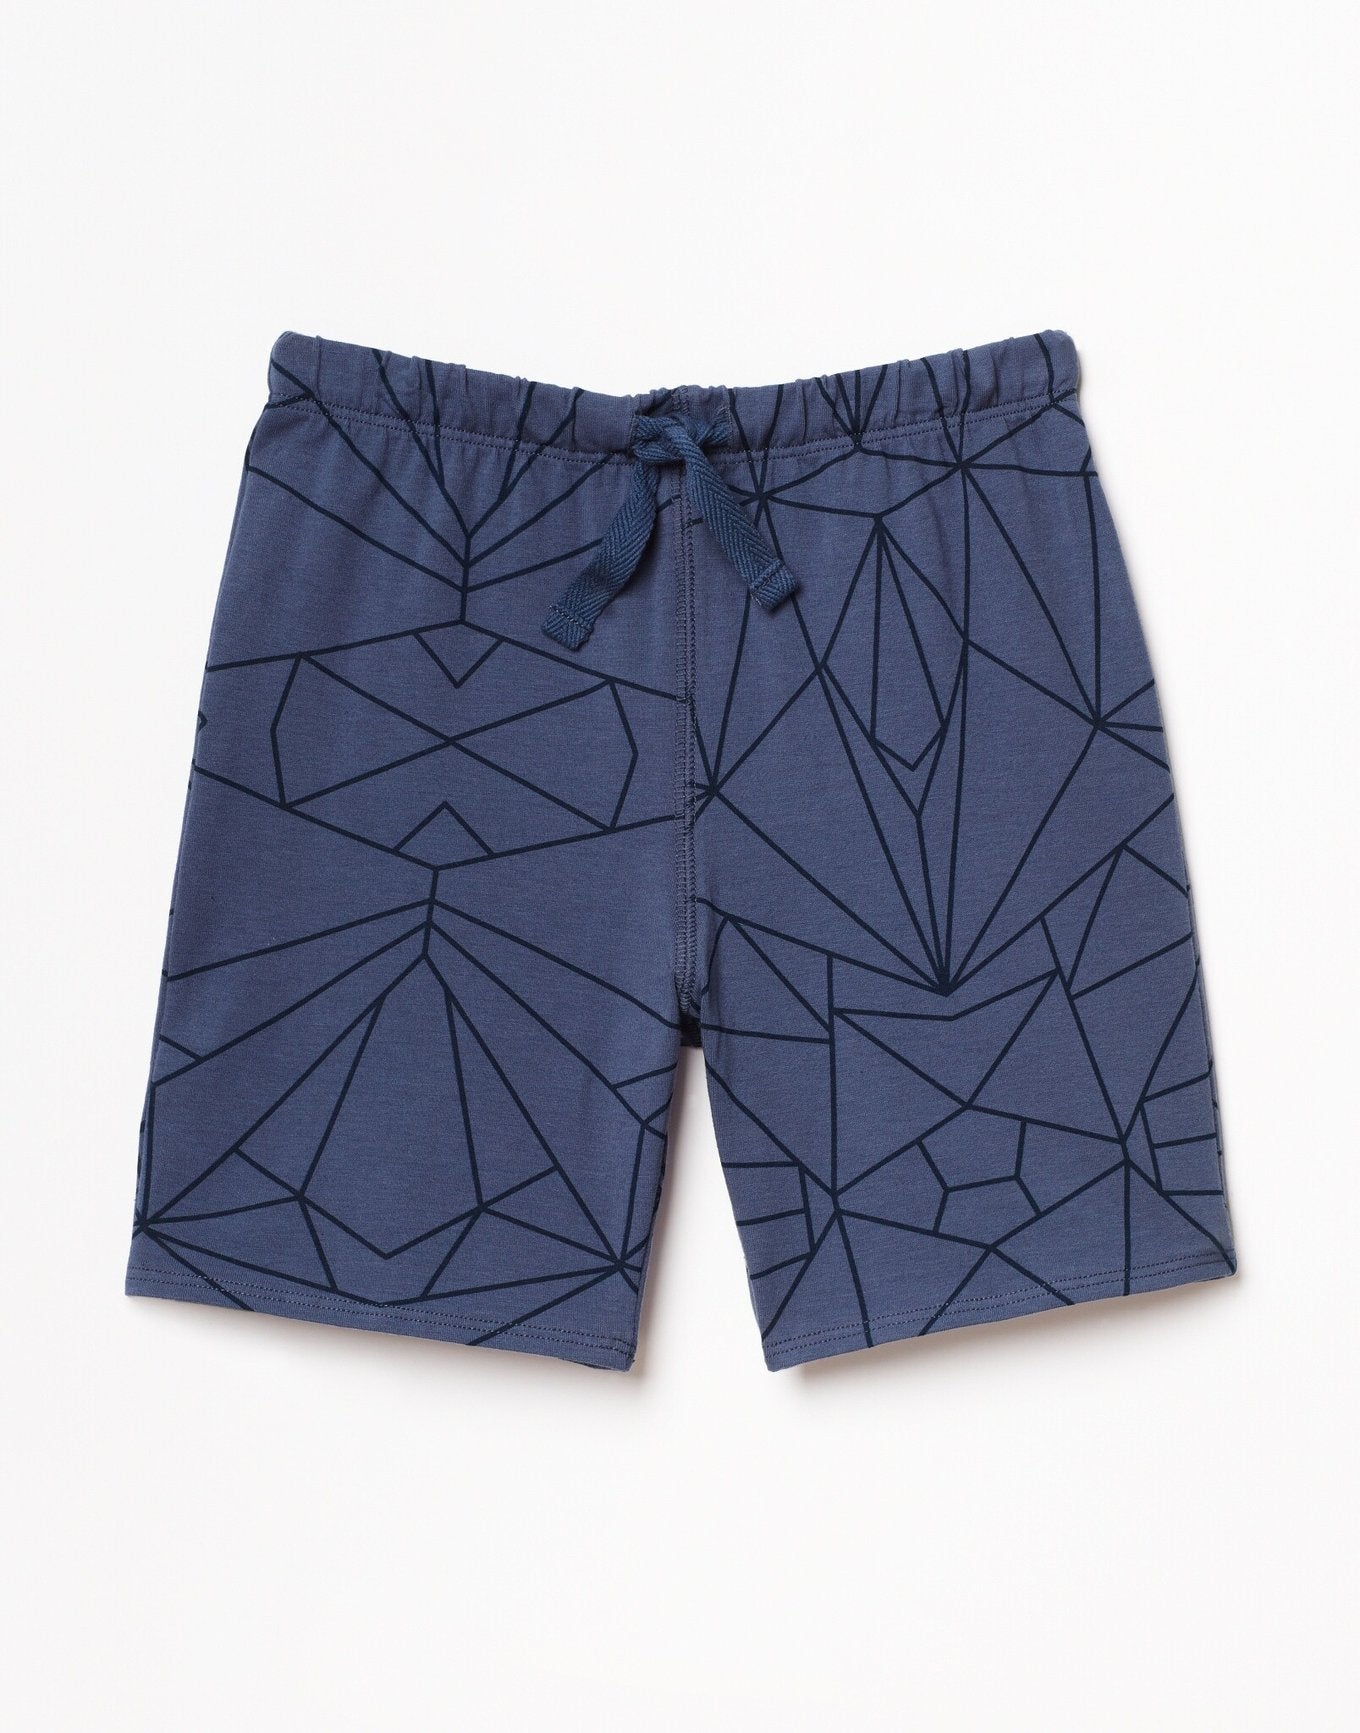 Outlines Kids Nolan in color Blue Geo and shape shorts